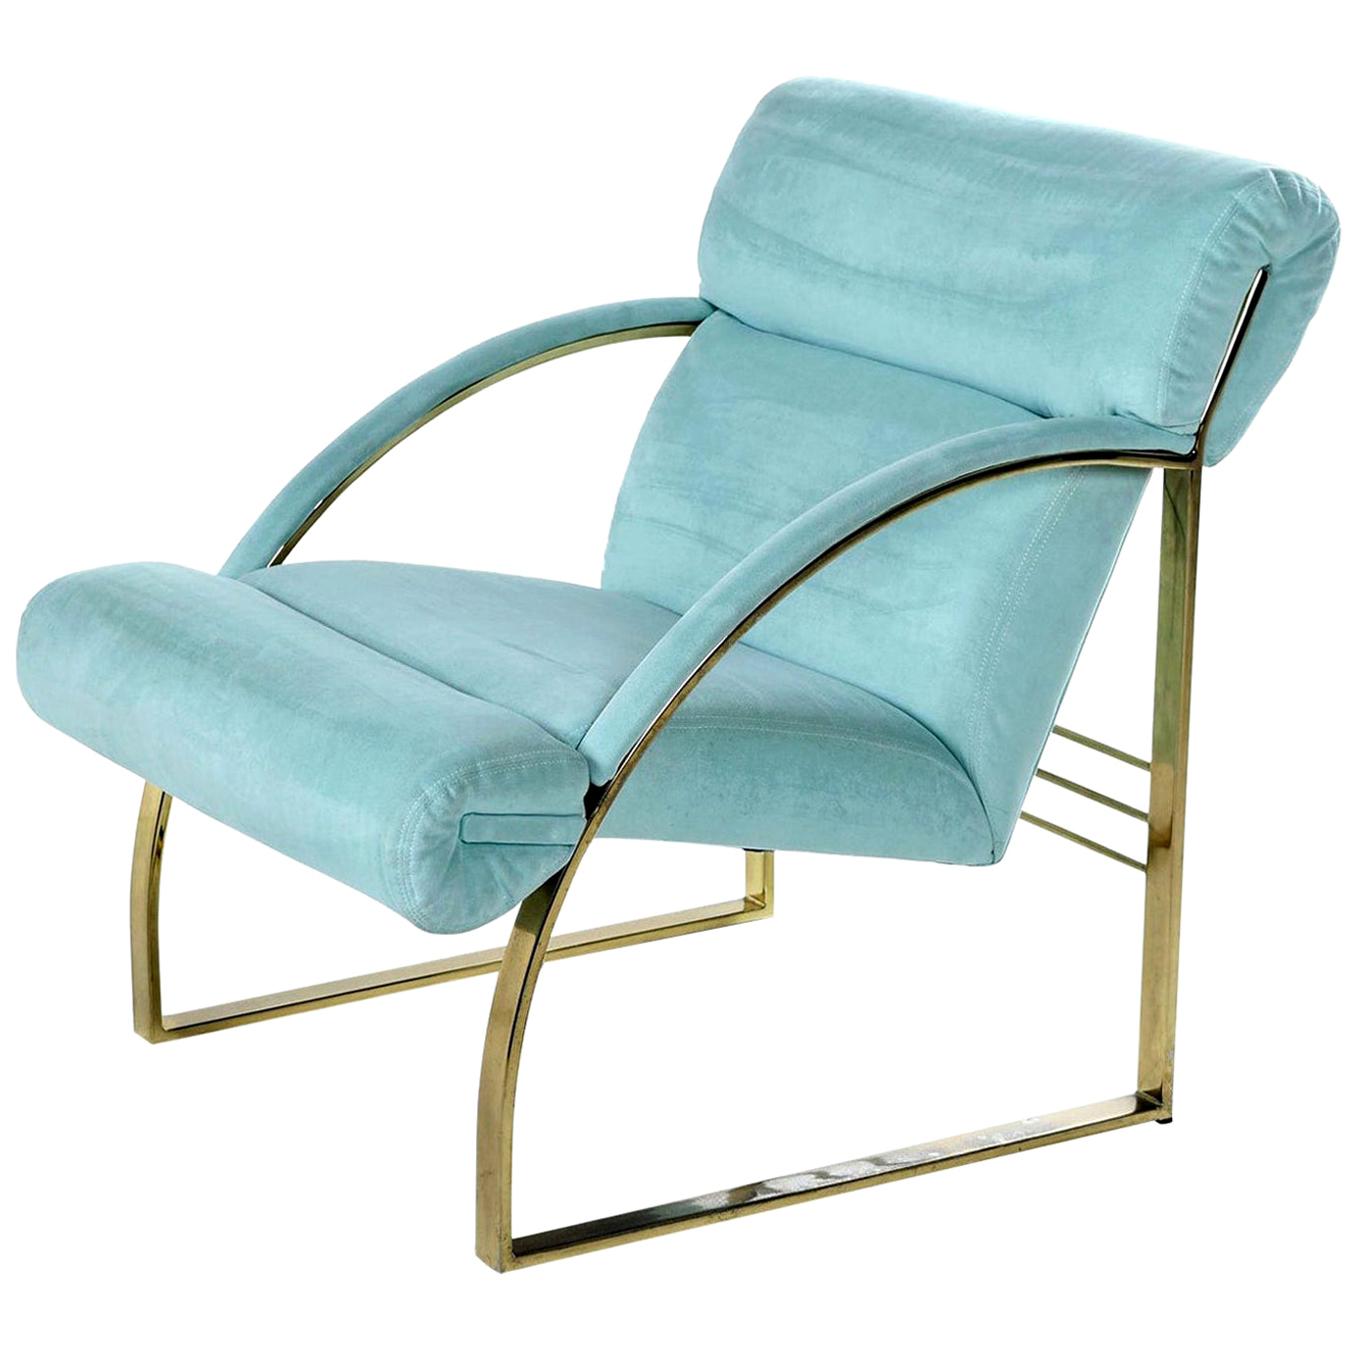 Heavy duty flat bar brass armchair by Carson's fine furniture. Inspired by the Milo Baughman BRNO chairs. Perfect for any Mid-Century Modern or Hollywood Regency interior. Versatile size and design allows this chair to integrate as a lounge chair,